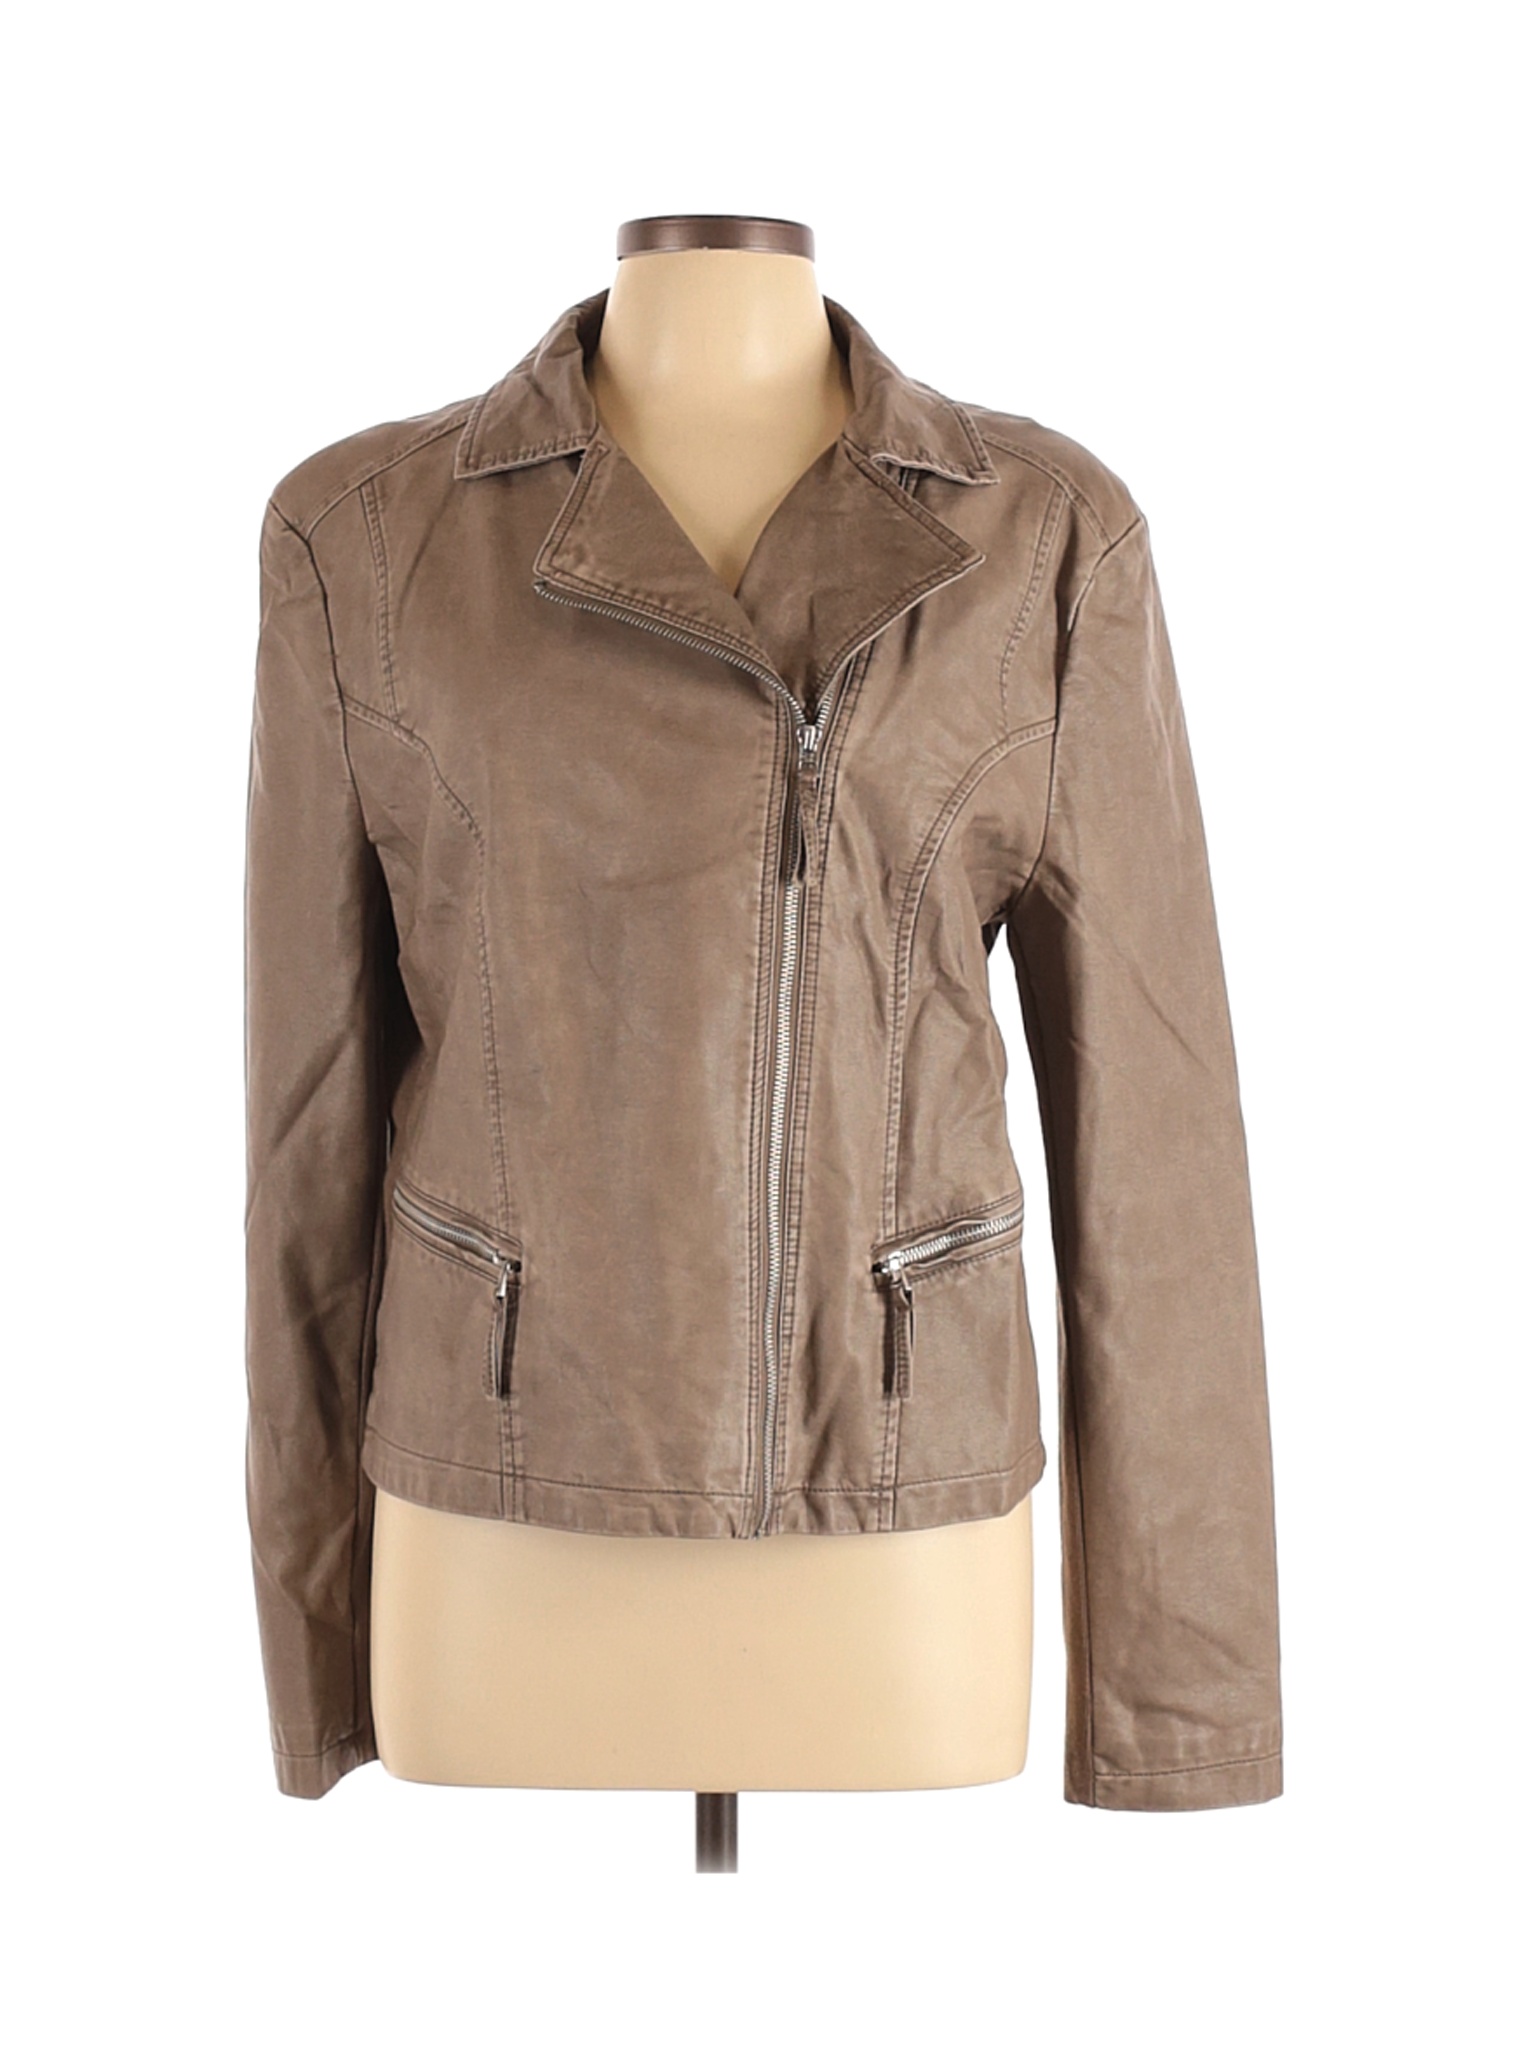 Marc by Andrew Marc Women Brown Faux Leather Jacket XL | eBay